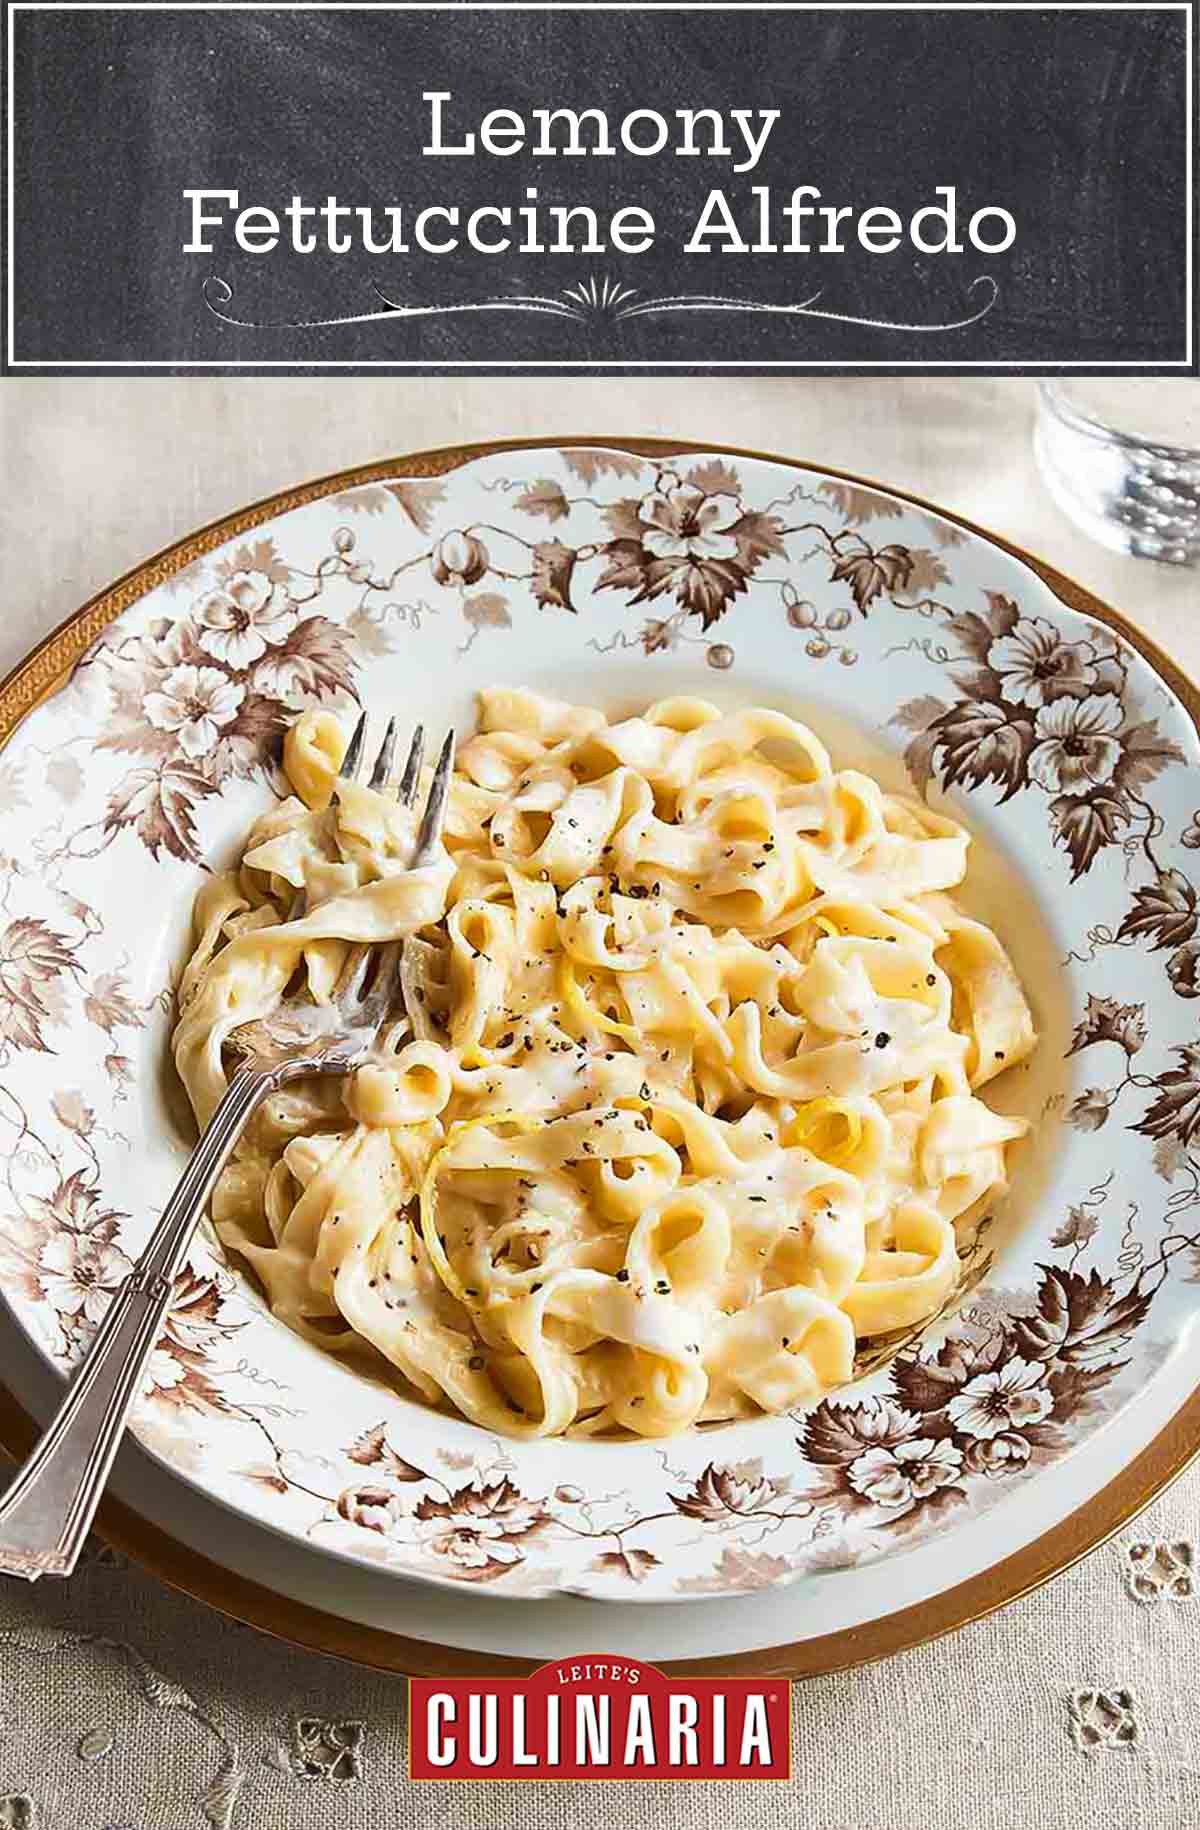 A patterned bowl filled with lemony fettuccine alfredo on a white and gold plate with a glass of water and dish of Parmesan on the side.